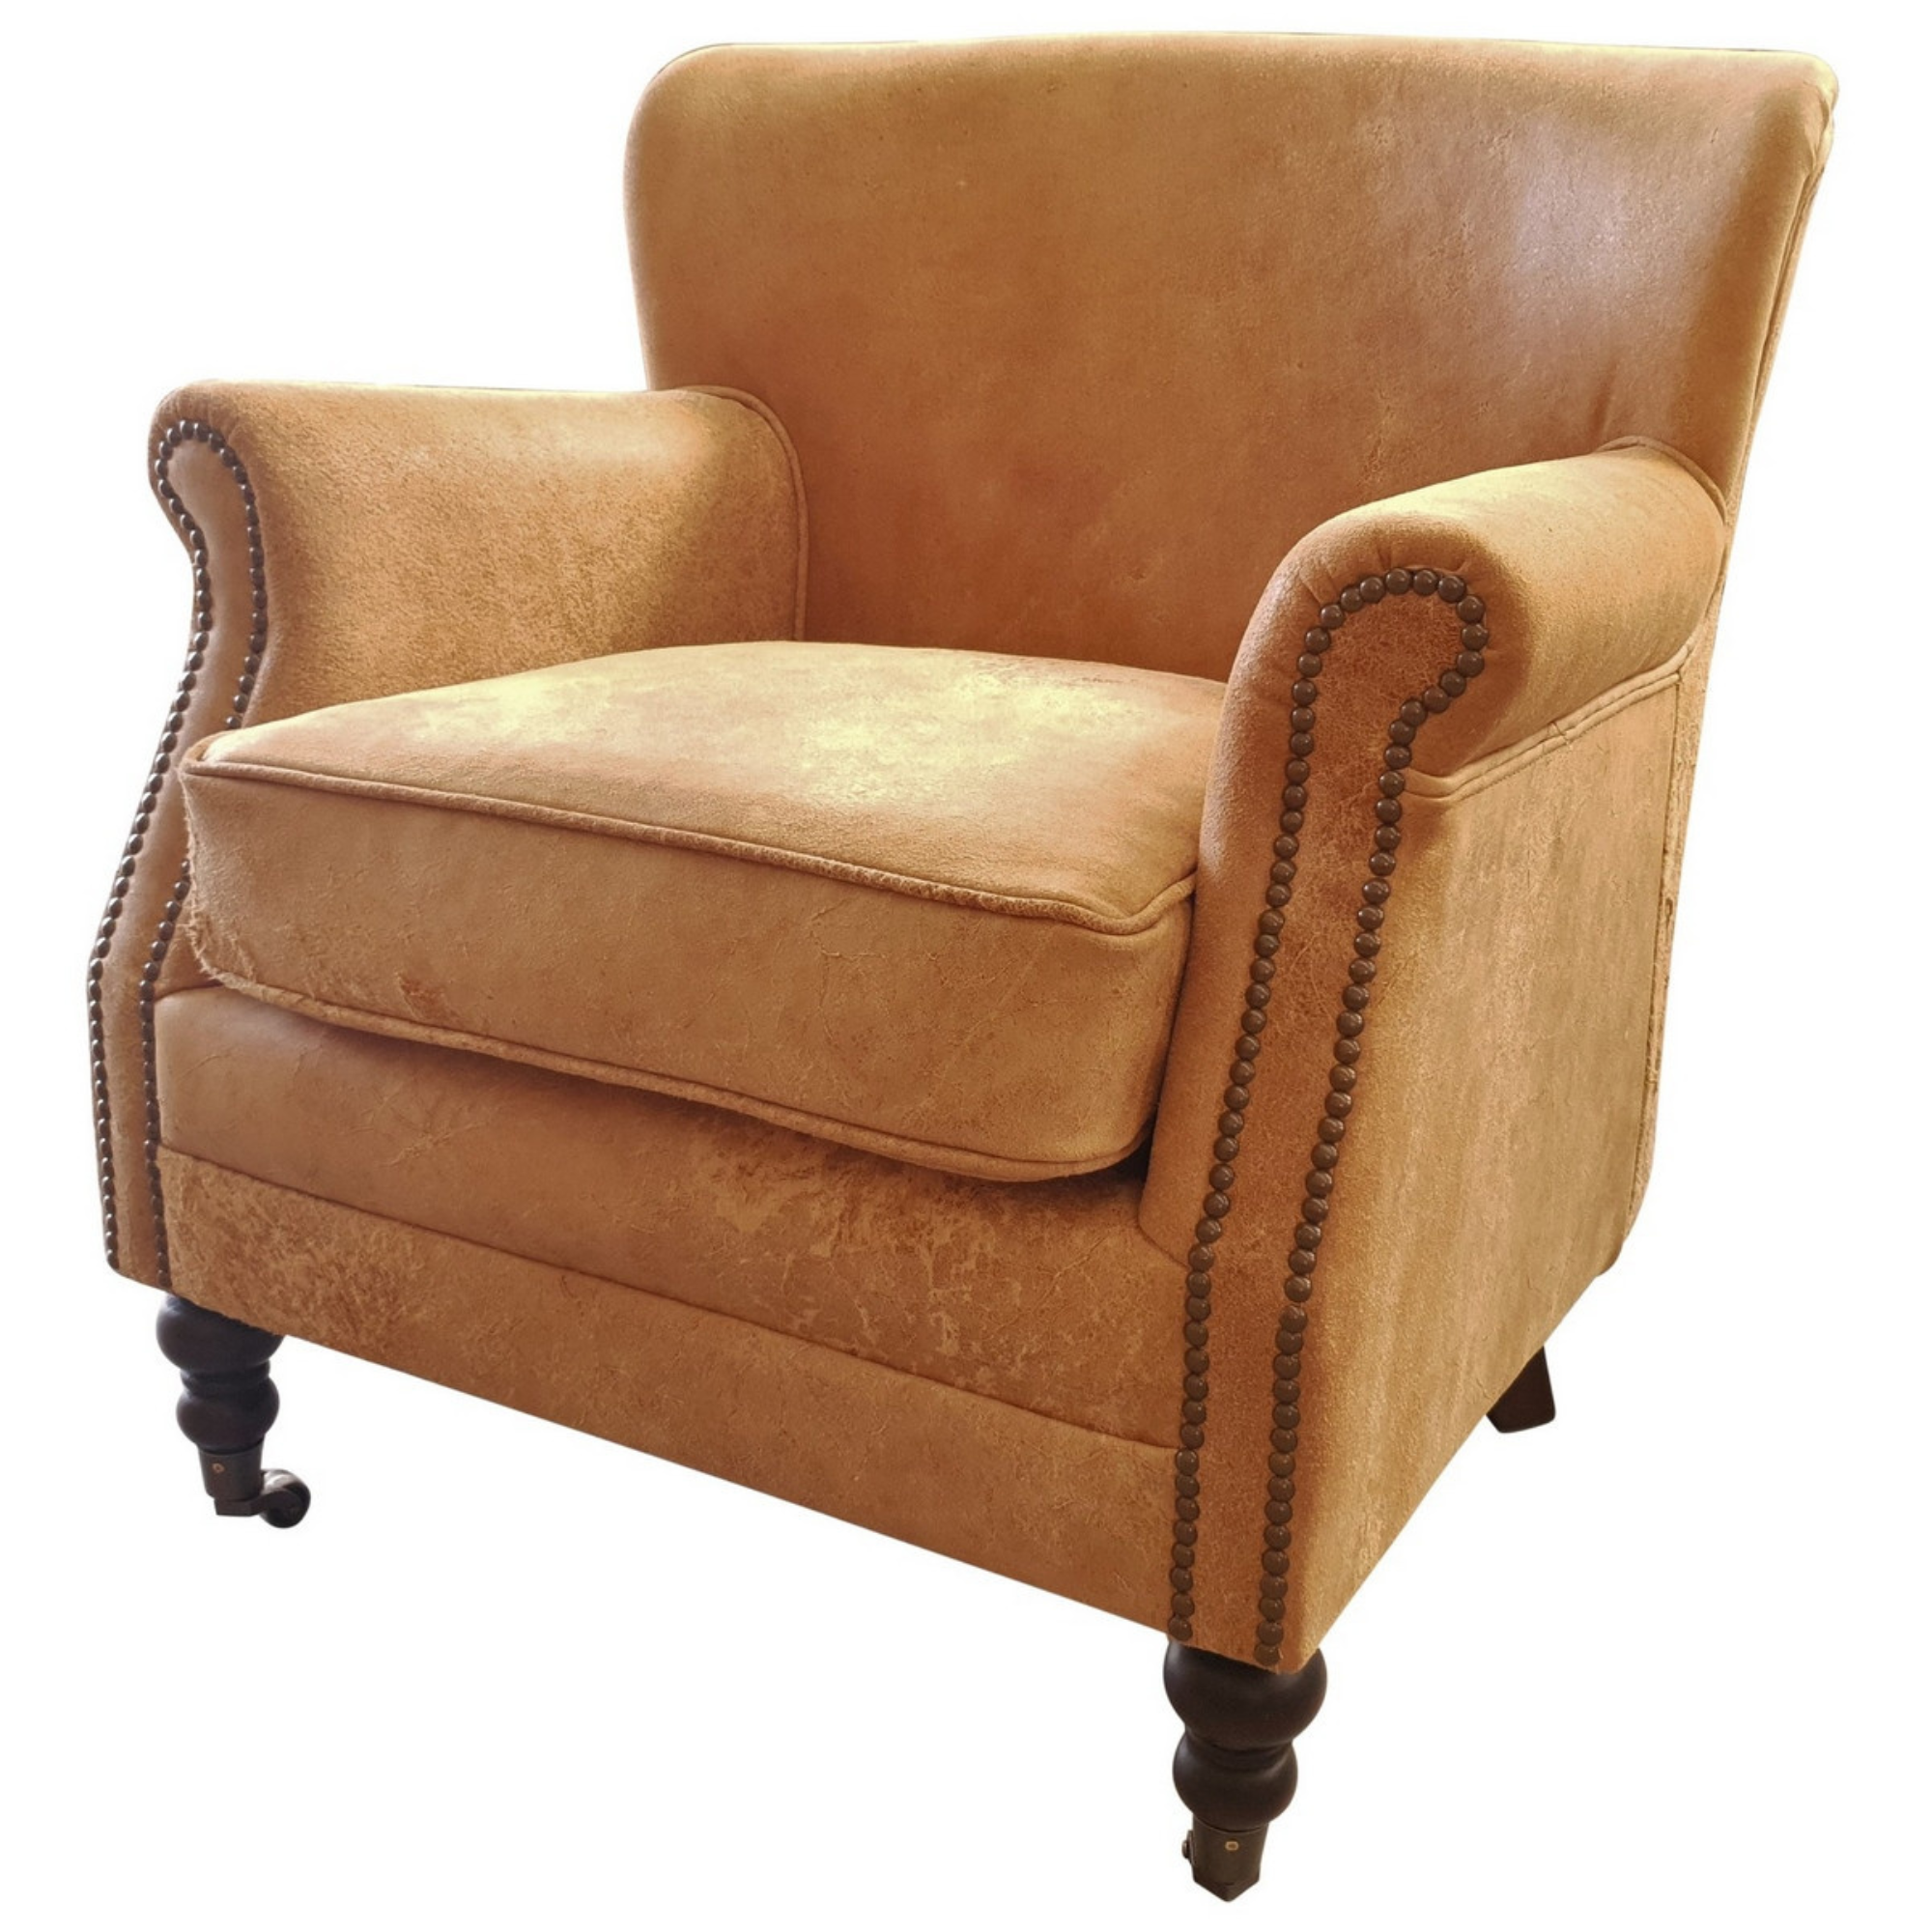 STIRLING LEATHER ARMCHAIR